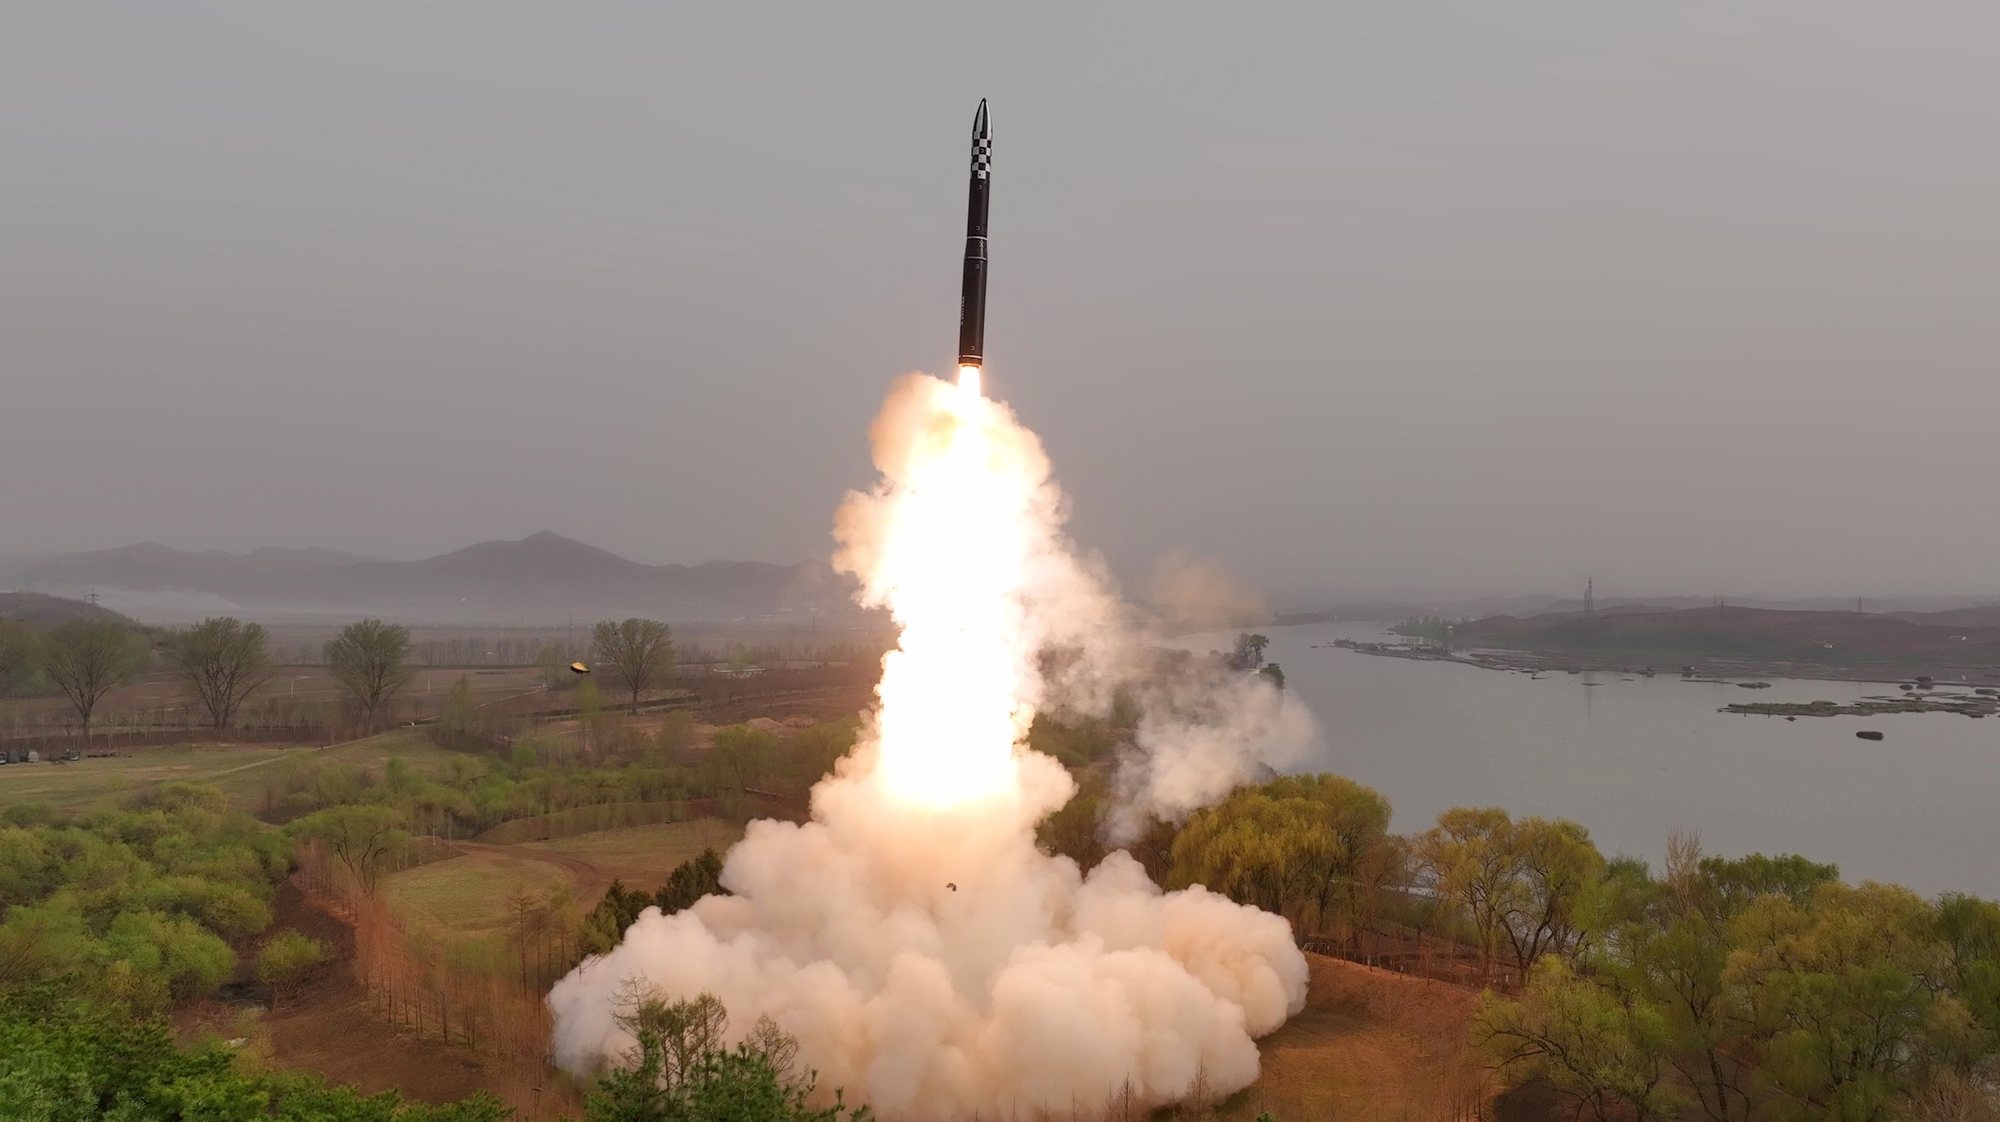 epa10571728 A photo released by the official North Korean Central News Agency (KCNA) shows the test firing of a new solid-fuel Hwasong-18 intercontinental ballistic missile (ICBM) at an undisclosed location in North Korea, 13 April 2023 (Issued 14 April 2023). According to KCNA, a new-type of ICBM Hwasongpho-18 that will serve as an &#039;important war deterrent&#039;, was test-fired on 13 April where the first stage safely landed in the waters 10 kilometres off the Hodo Peninsula in Kumya County, South Hamgyong Province and the second stage in the waters 335 kilometres east of Orang County, North Hamgyong Province.  EPA/KCNA   EDITORIAL USE ONLY  EDITORIAL USE ONLY